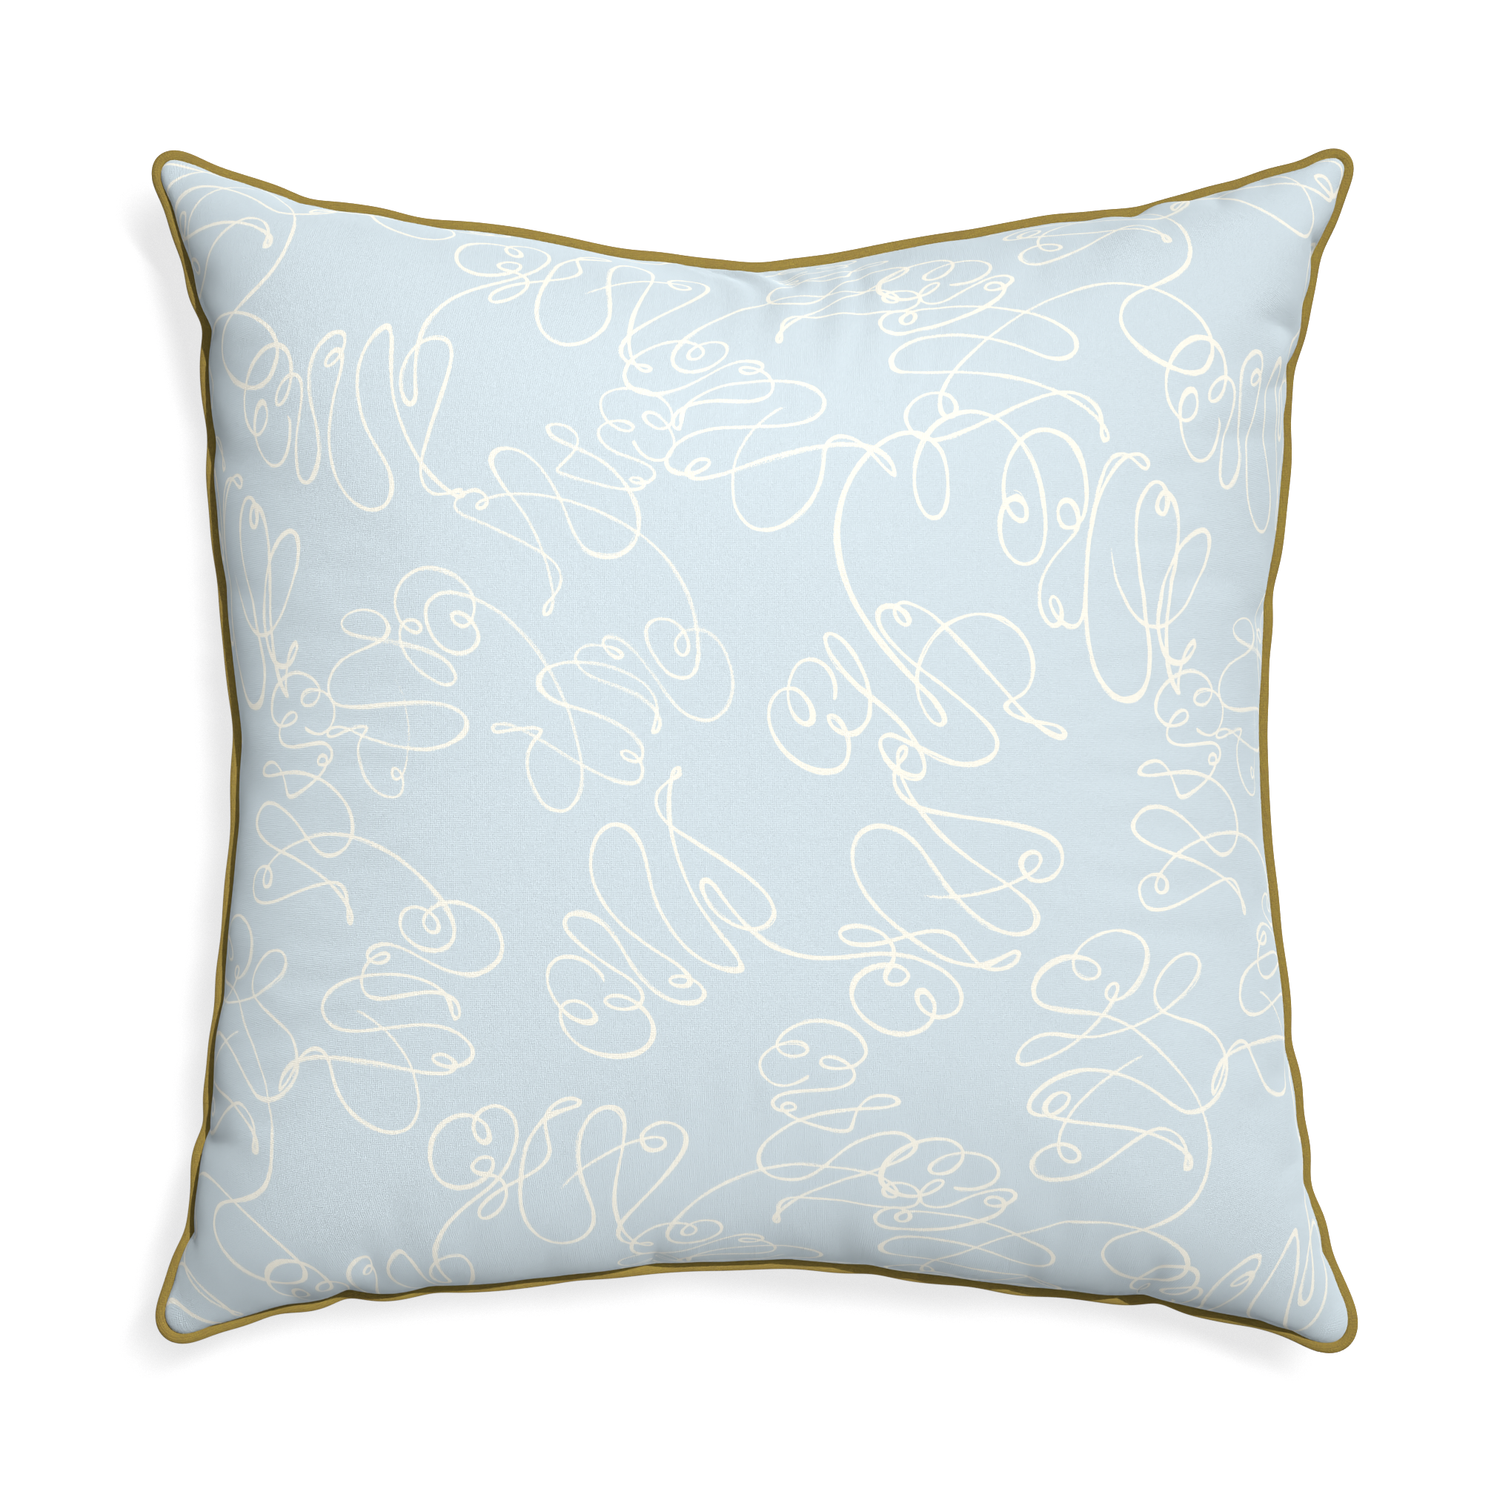 Euro-sham mirabella custom powder blue abstractpillow with c piping on white background